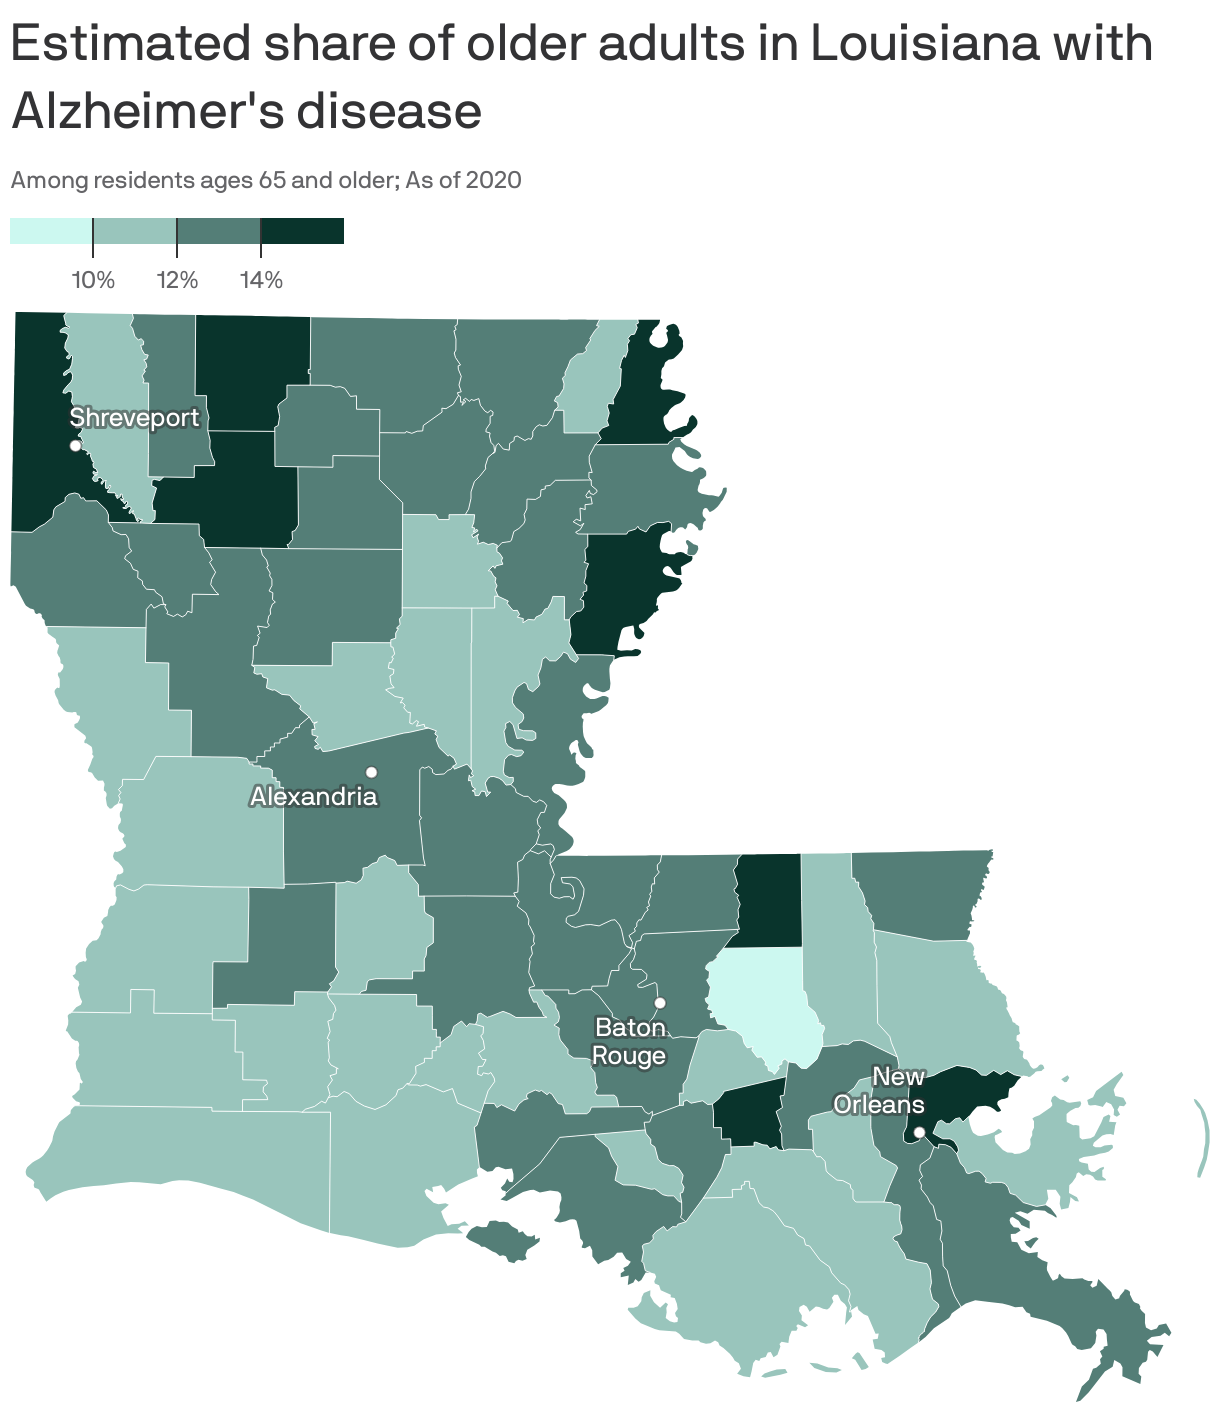 Estimated share of older adults in Louisiana with Alzheimer's disease